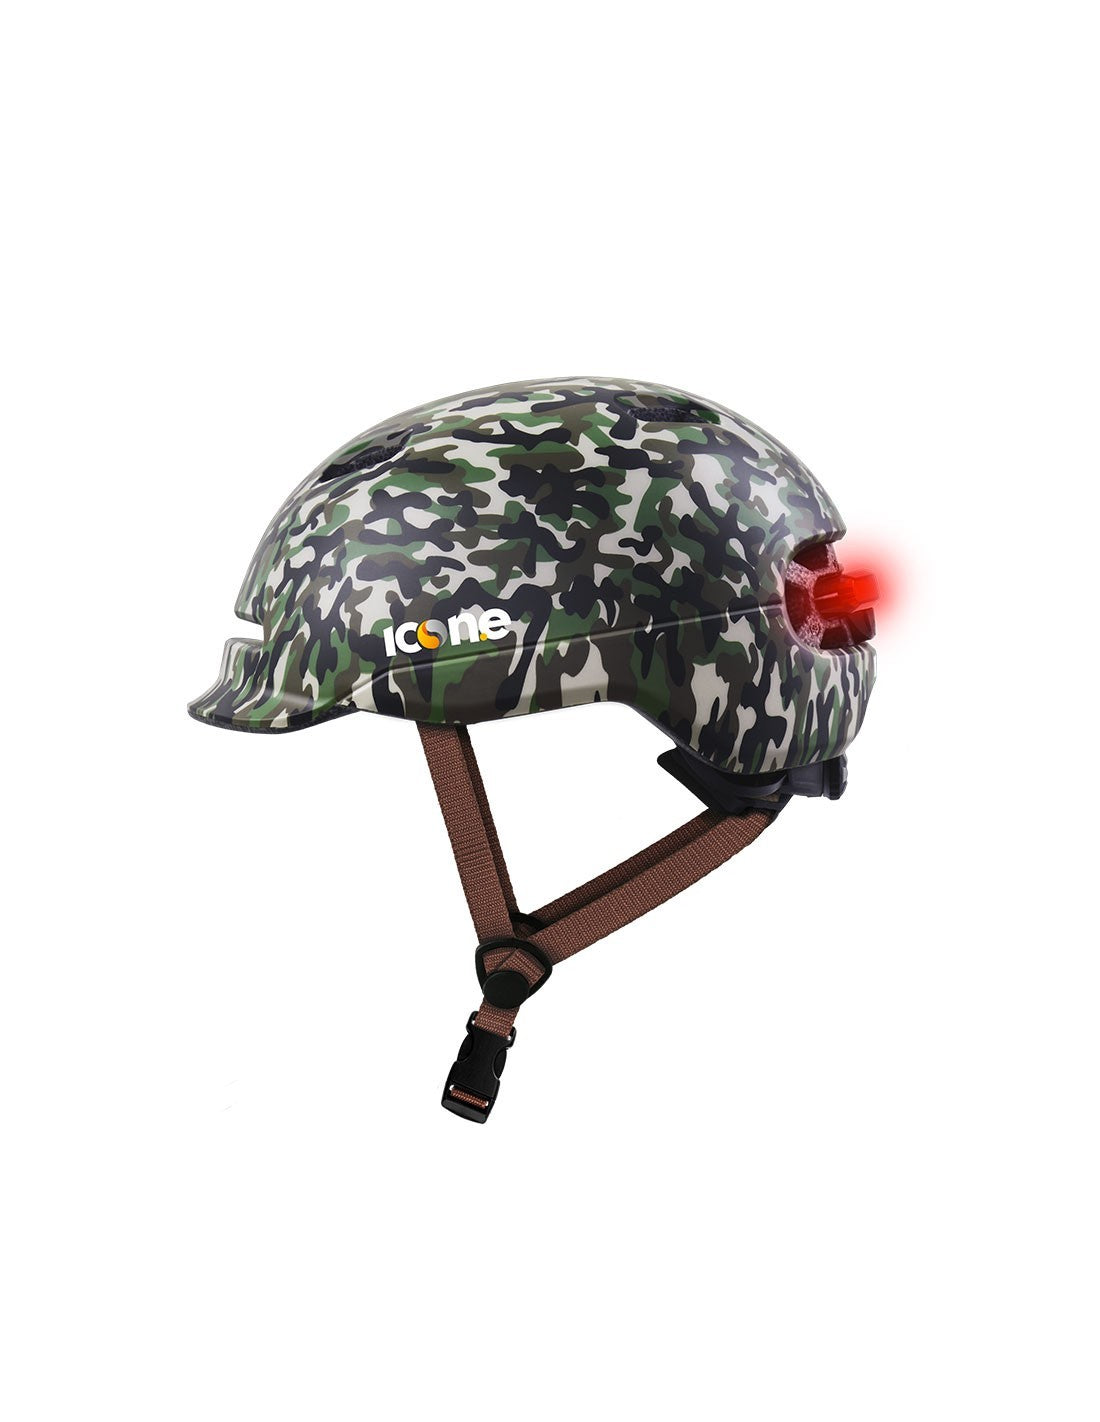 ICON.E ACCESSORY HELMET AIR CAMOUFLAGE MILITARY GREEN